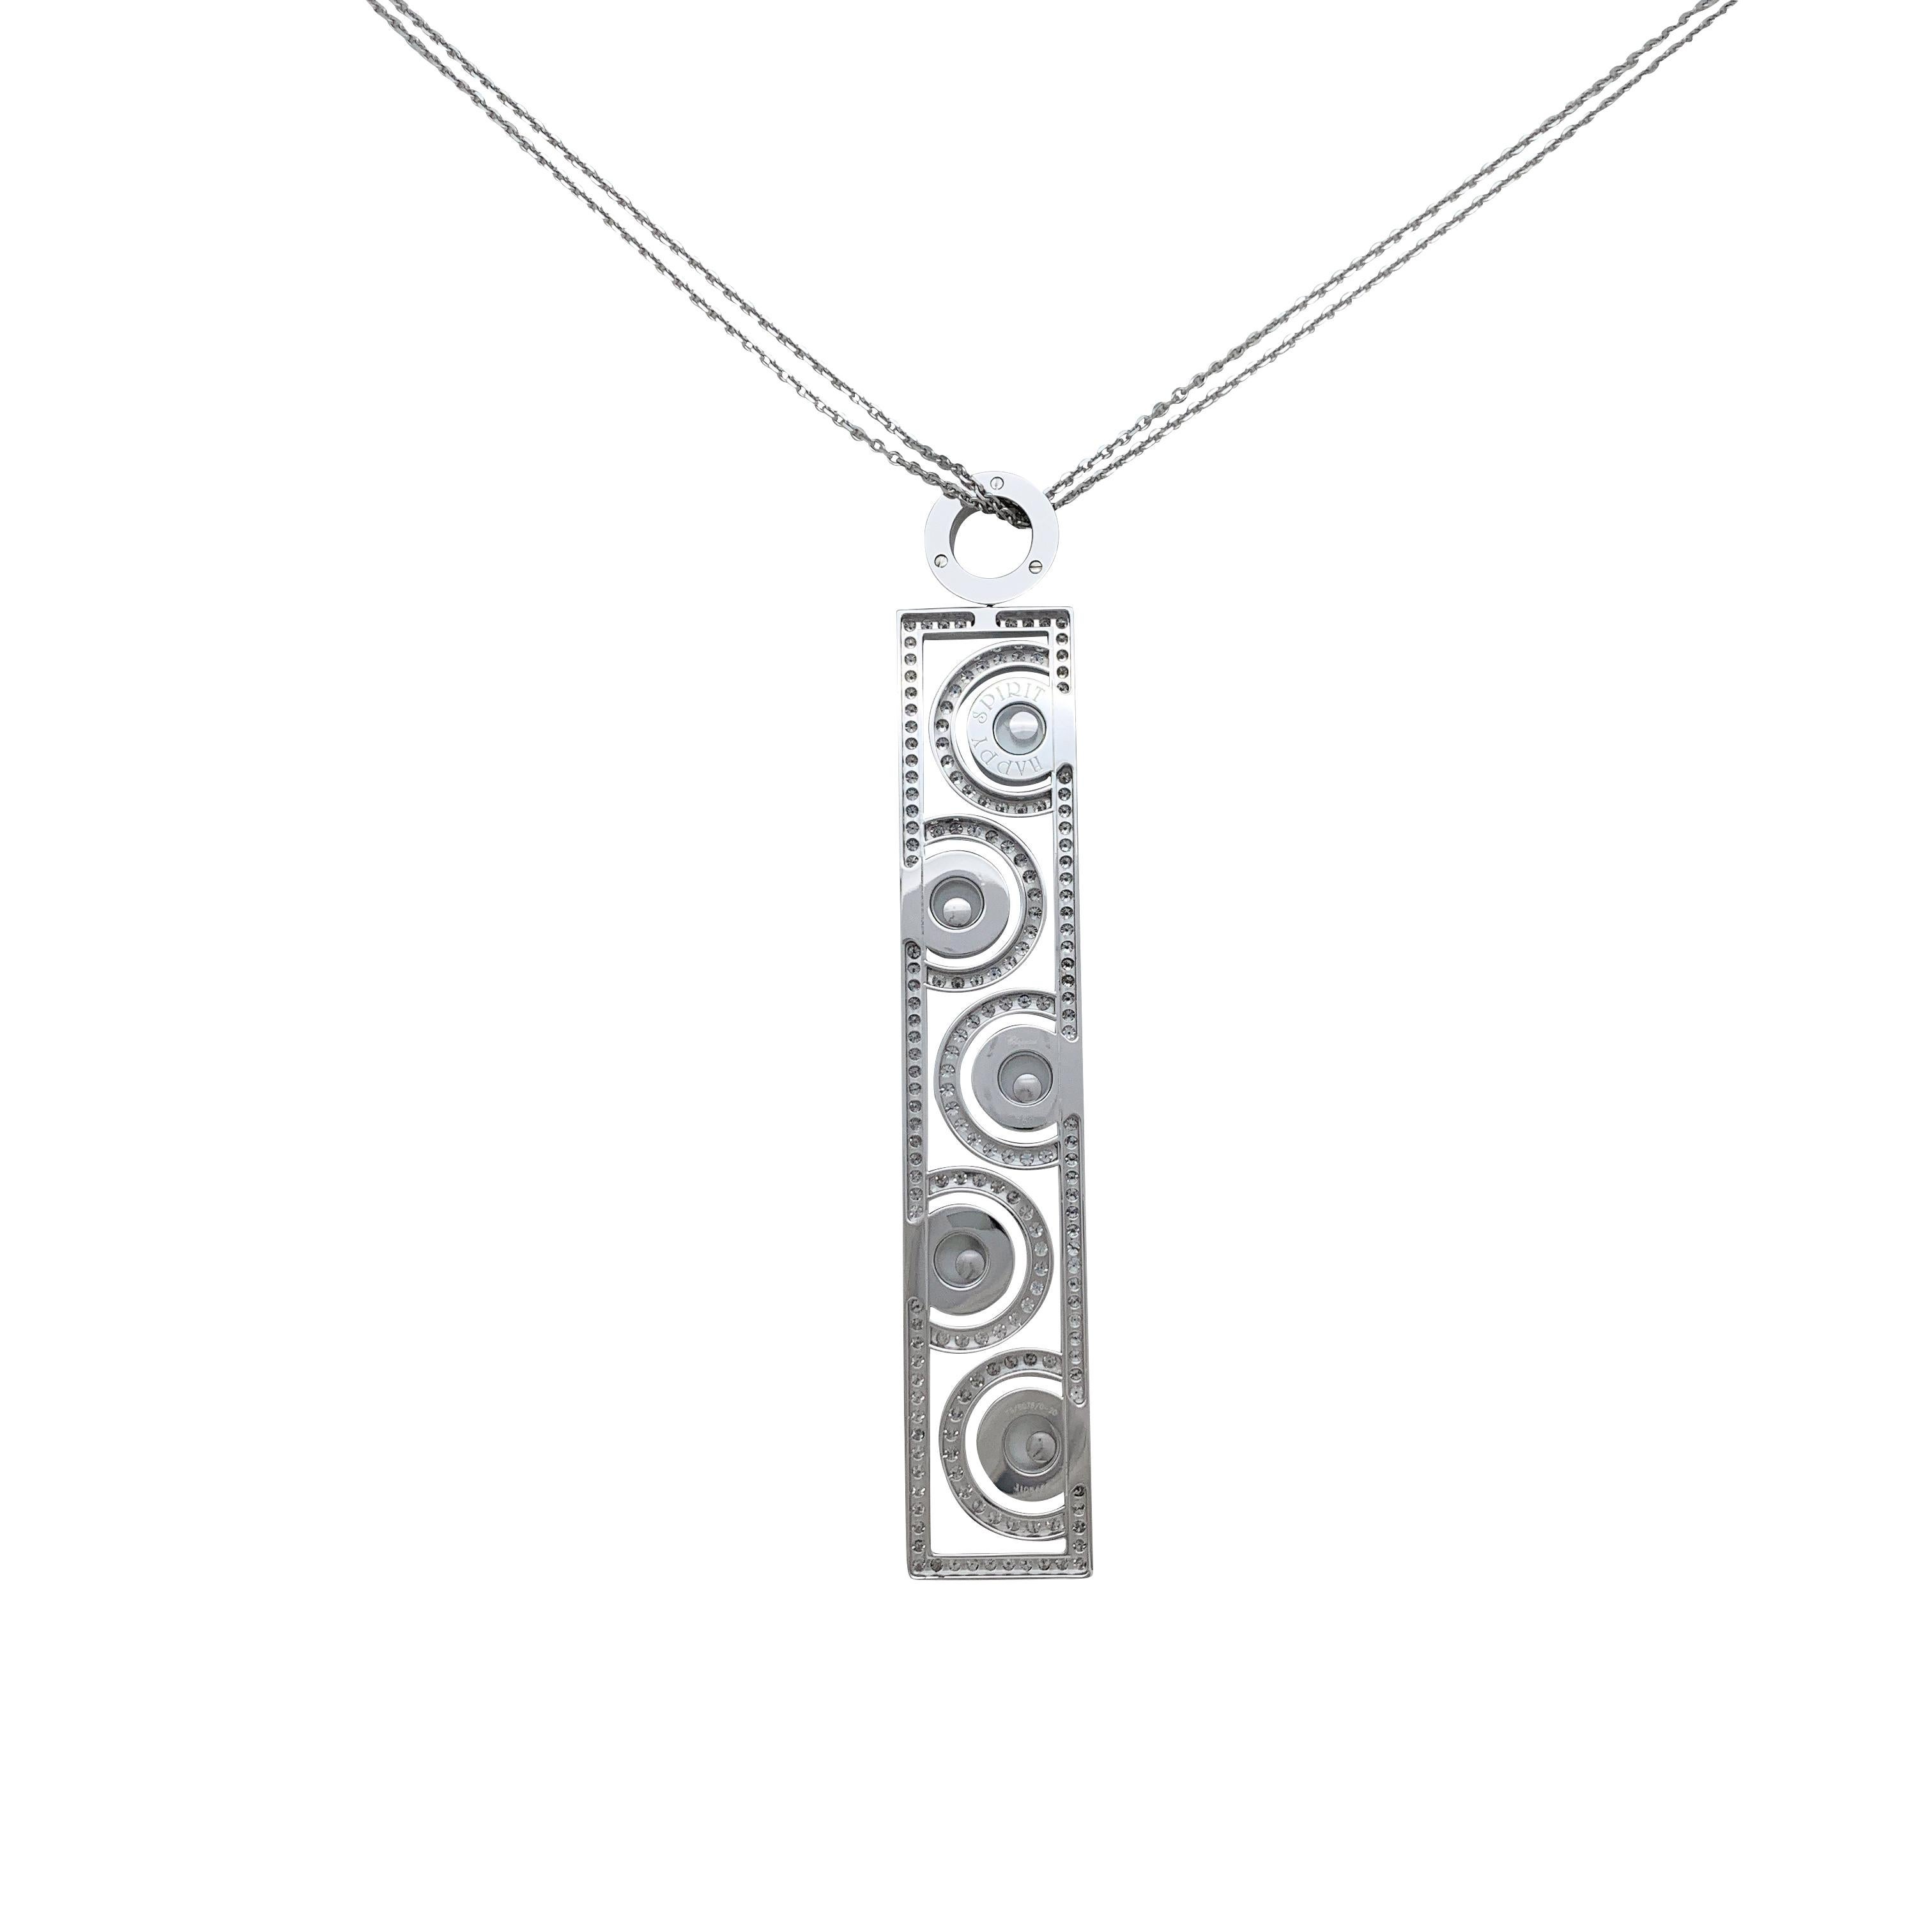 An18Kt white gold Chopard pendant and chain, 